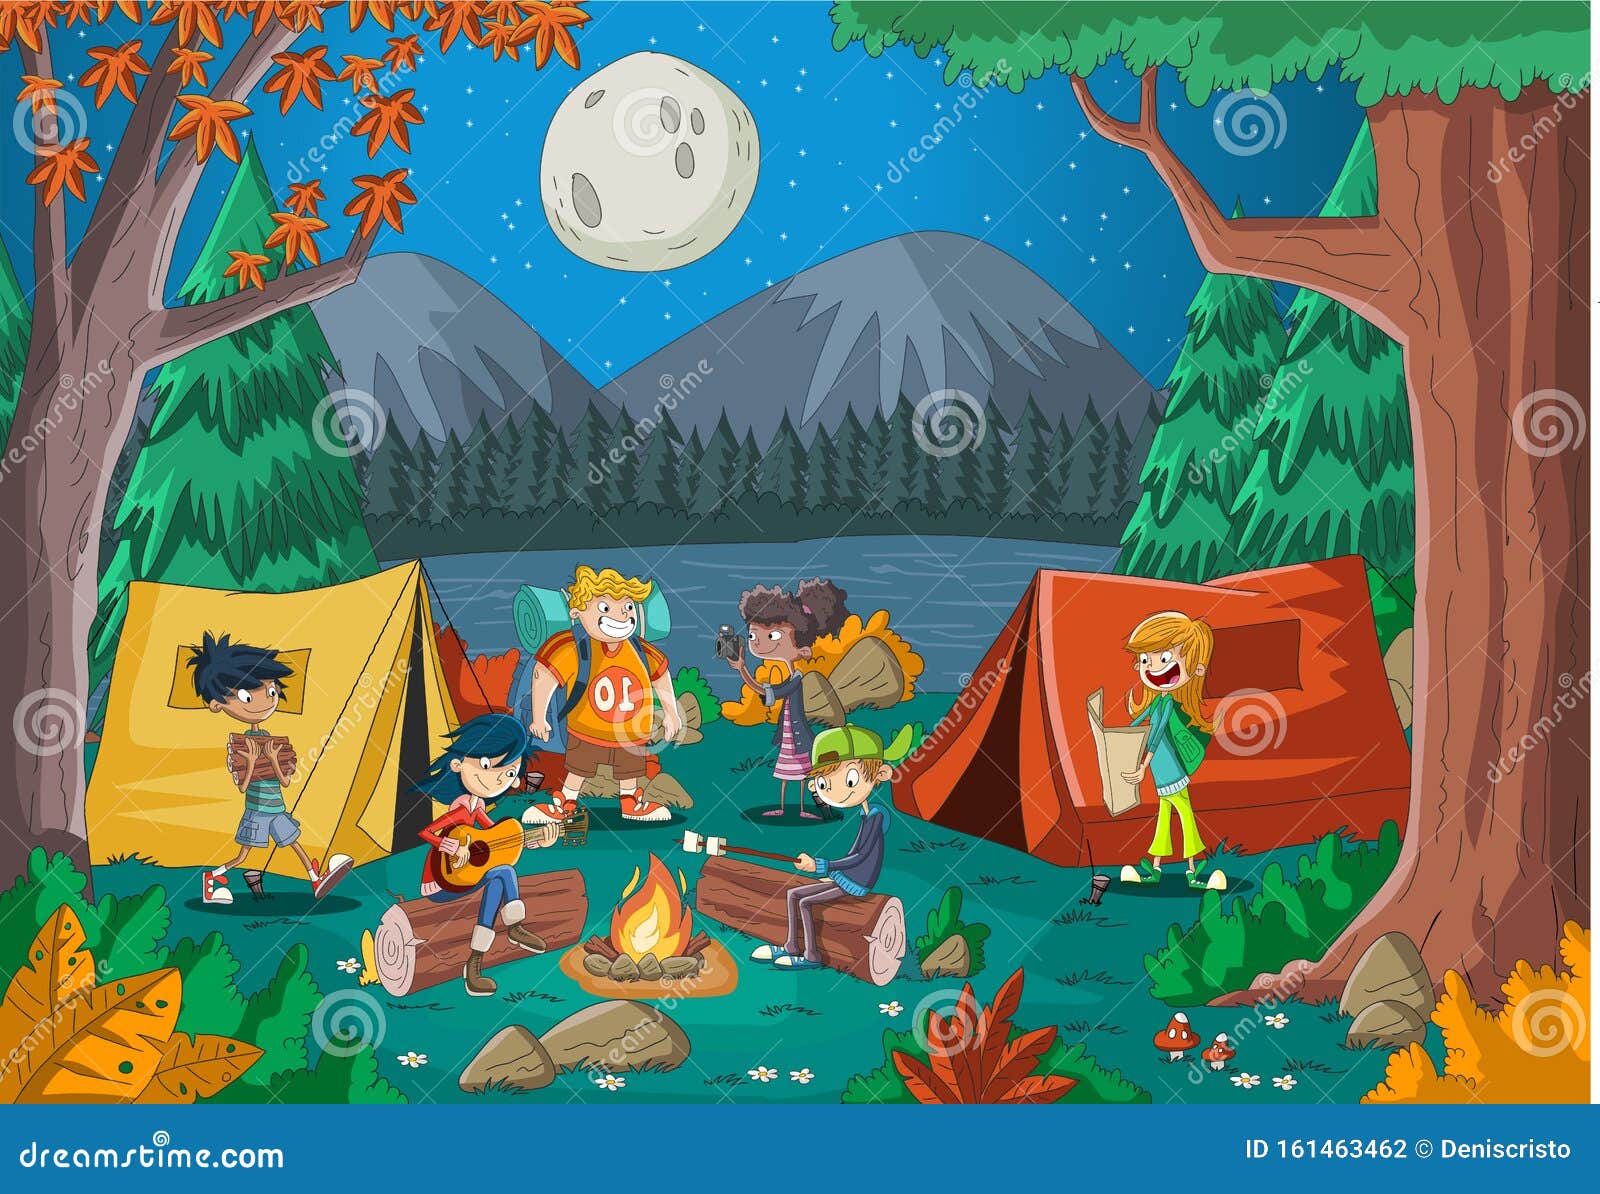 He is at camp. Camping Holidays для детей. Campsite картинка для детей. Go Camping картинки для детей. Camp мультяшные.